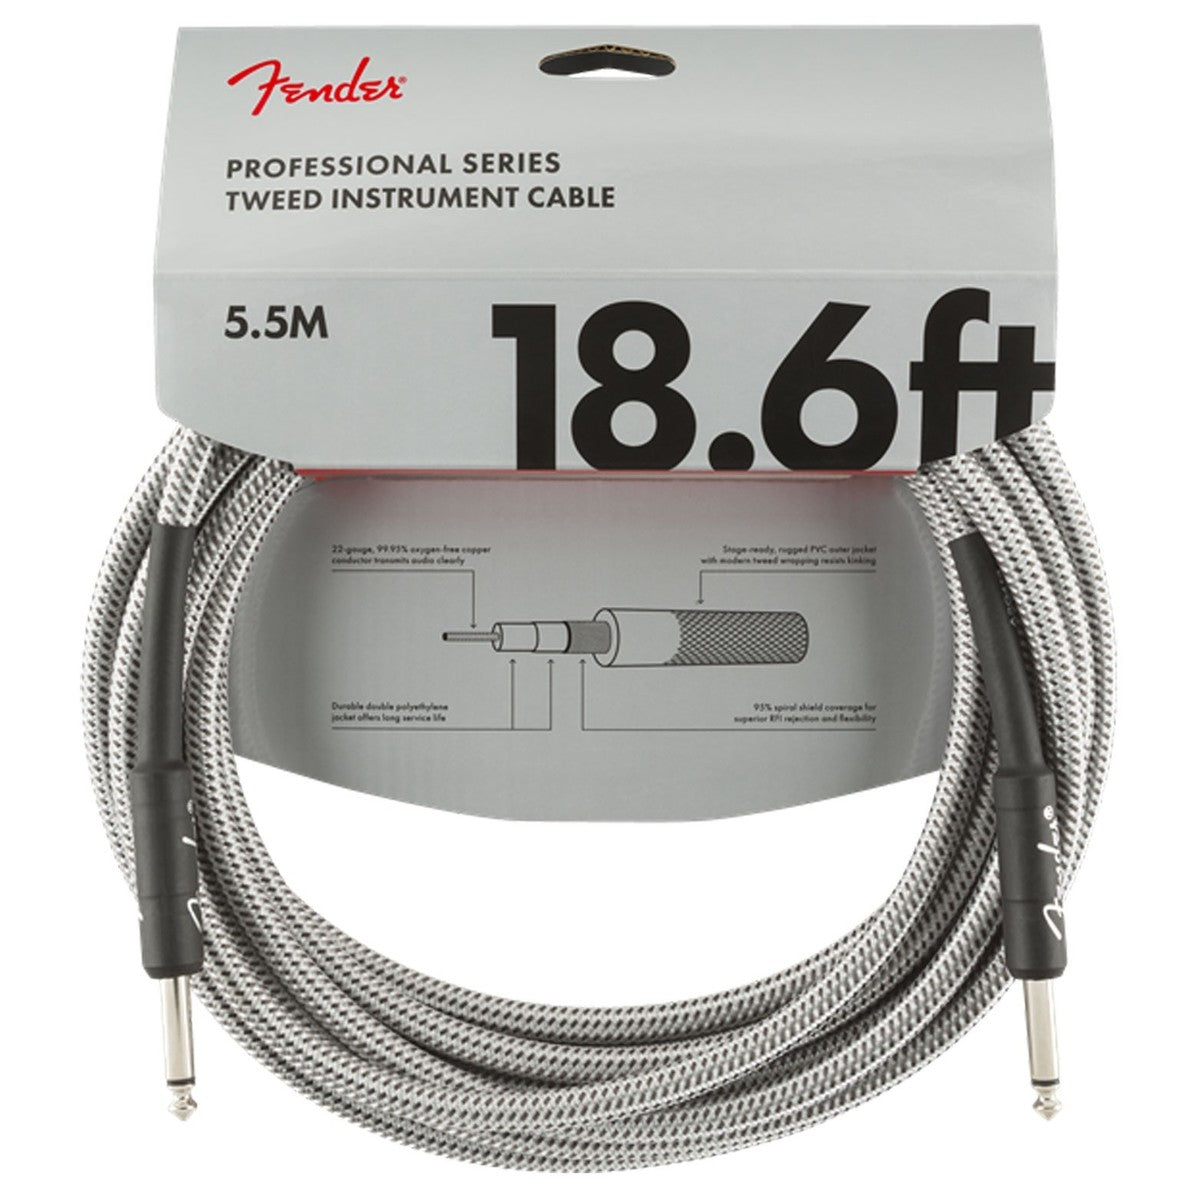 Fender Professional Series Tweed Cable - 18.6ft